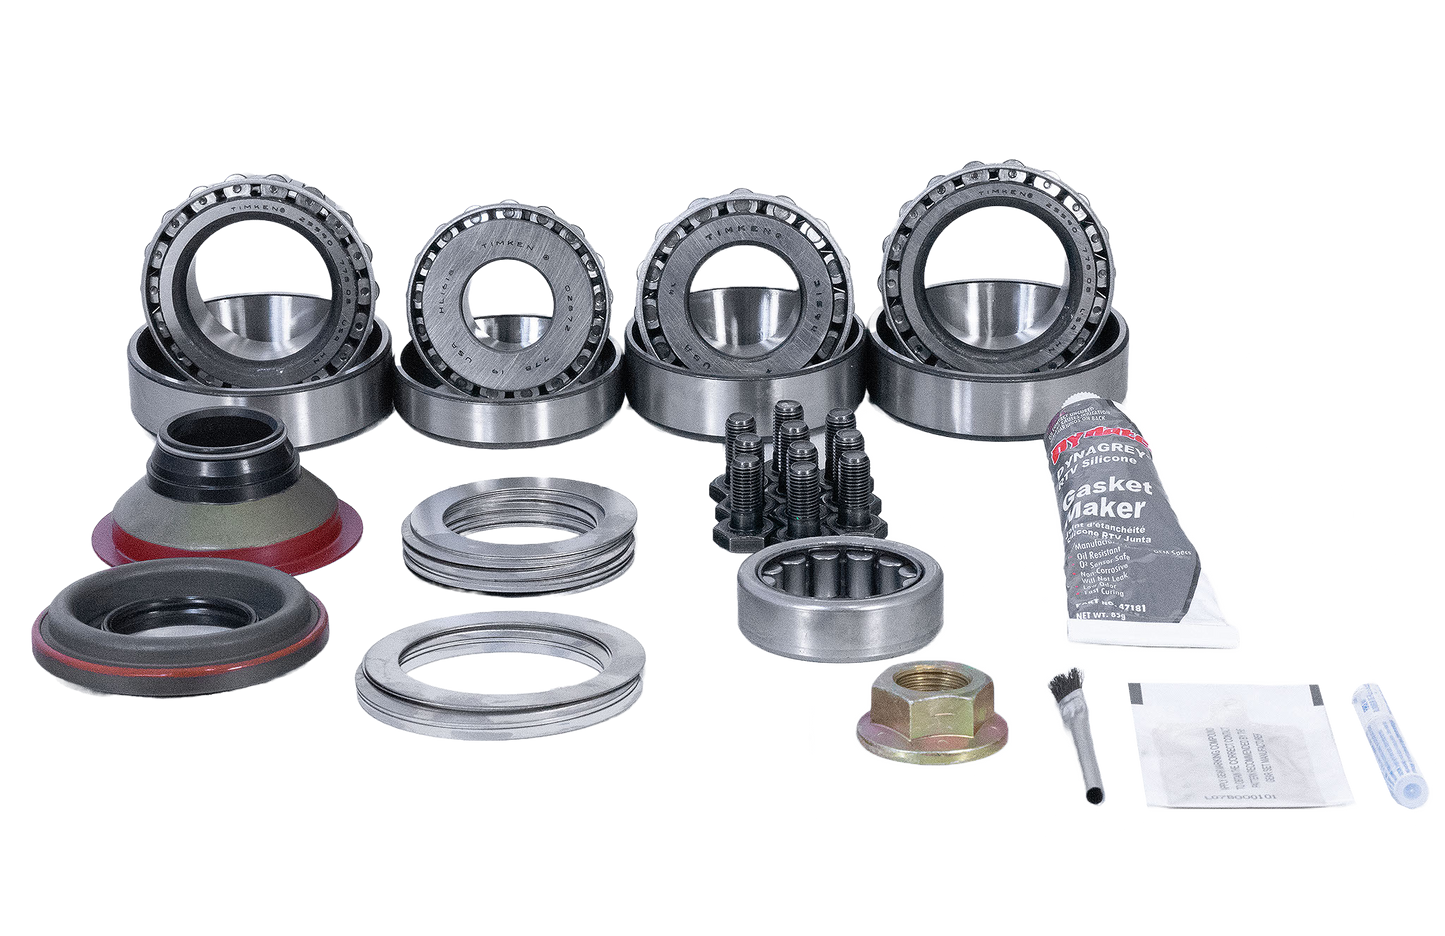 Dana 44 IFS Master Kit 80-92 F150 and Bronco Included Side Seals and Side Brg) Revolution Gear